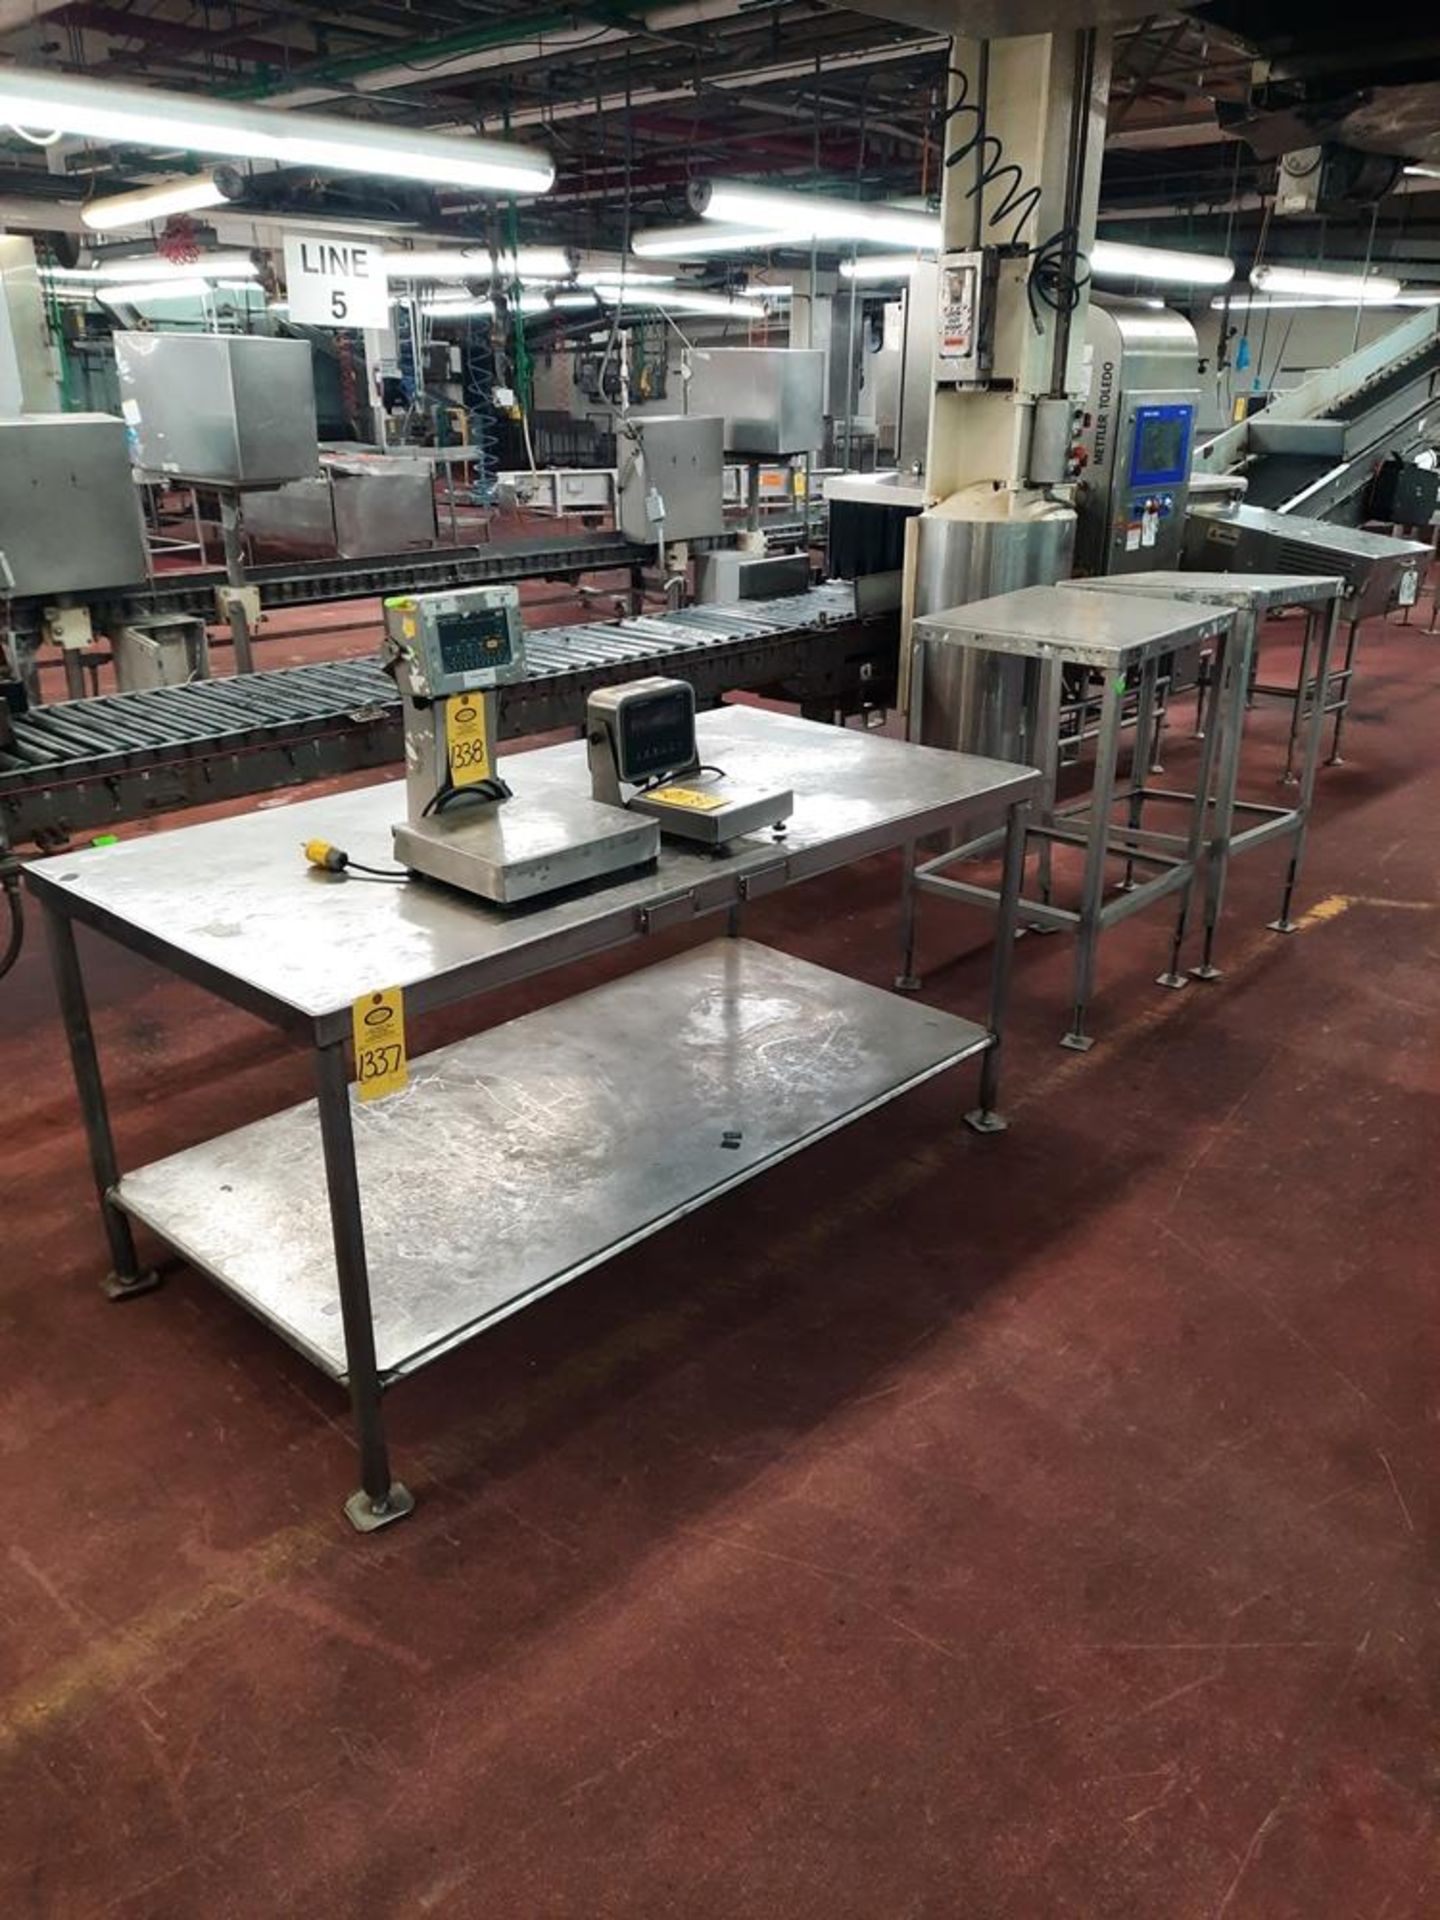 Lot Stainless Steel Tables, (1) 3' W X 6' L, (1) 2' W X 2' L: Required Loading Fee $75.00, Rigger-